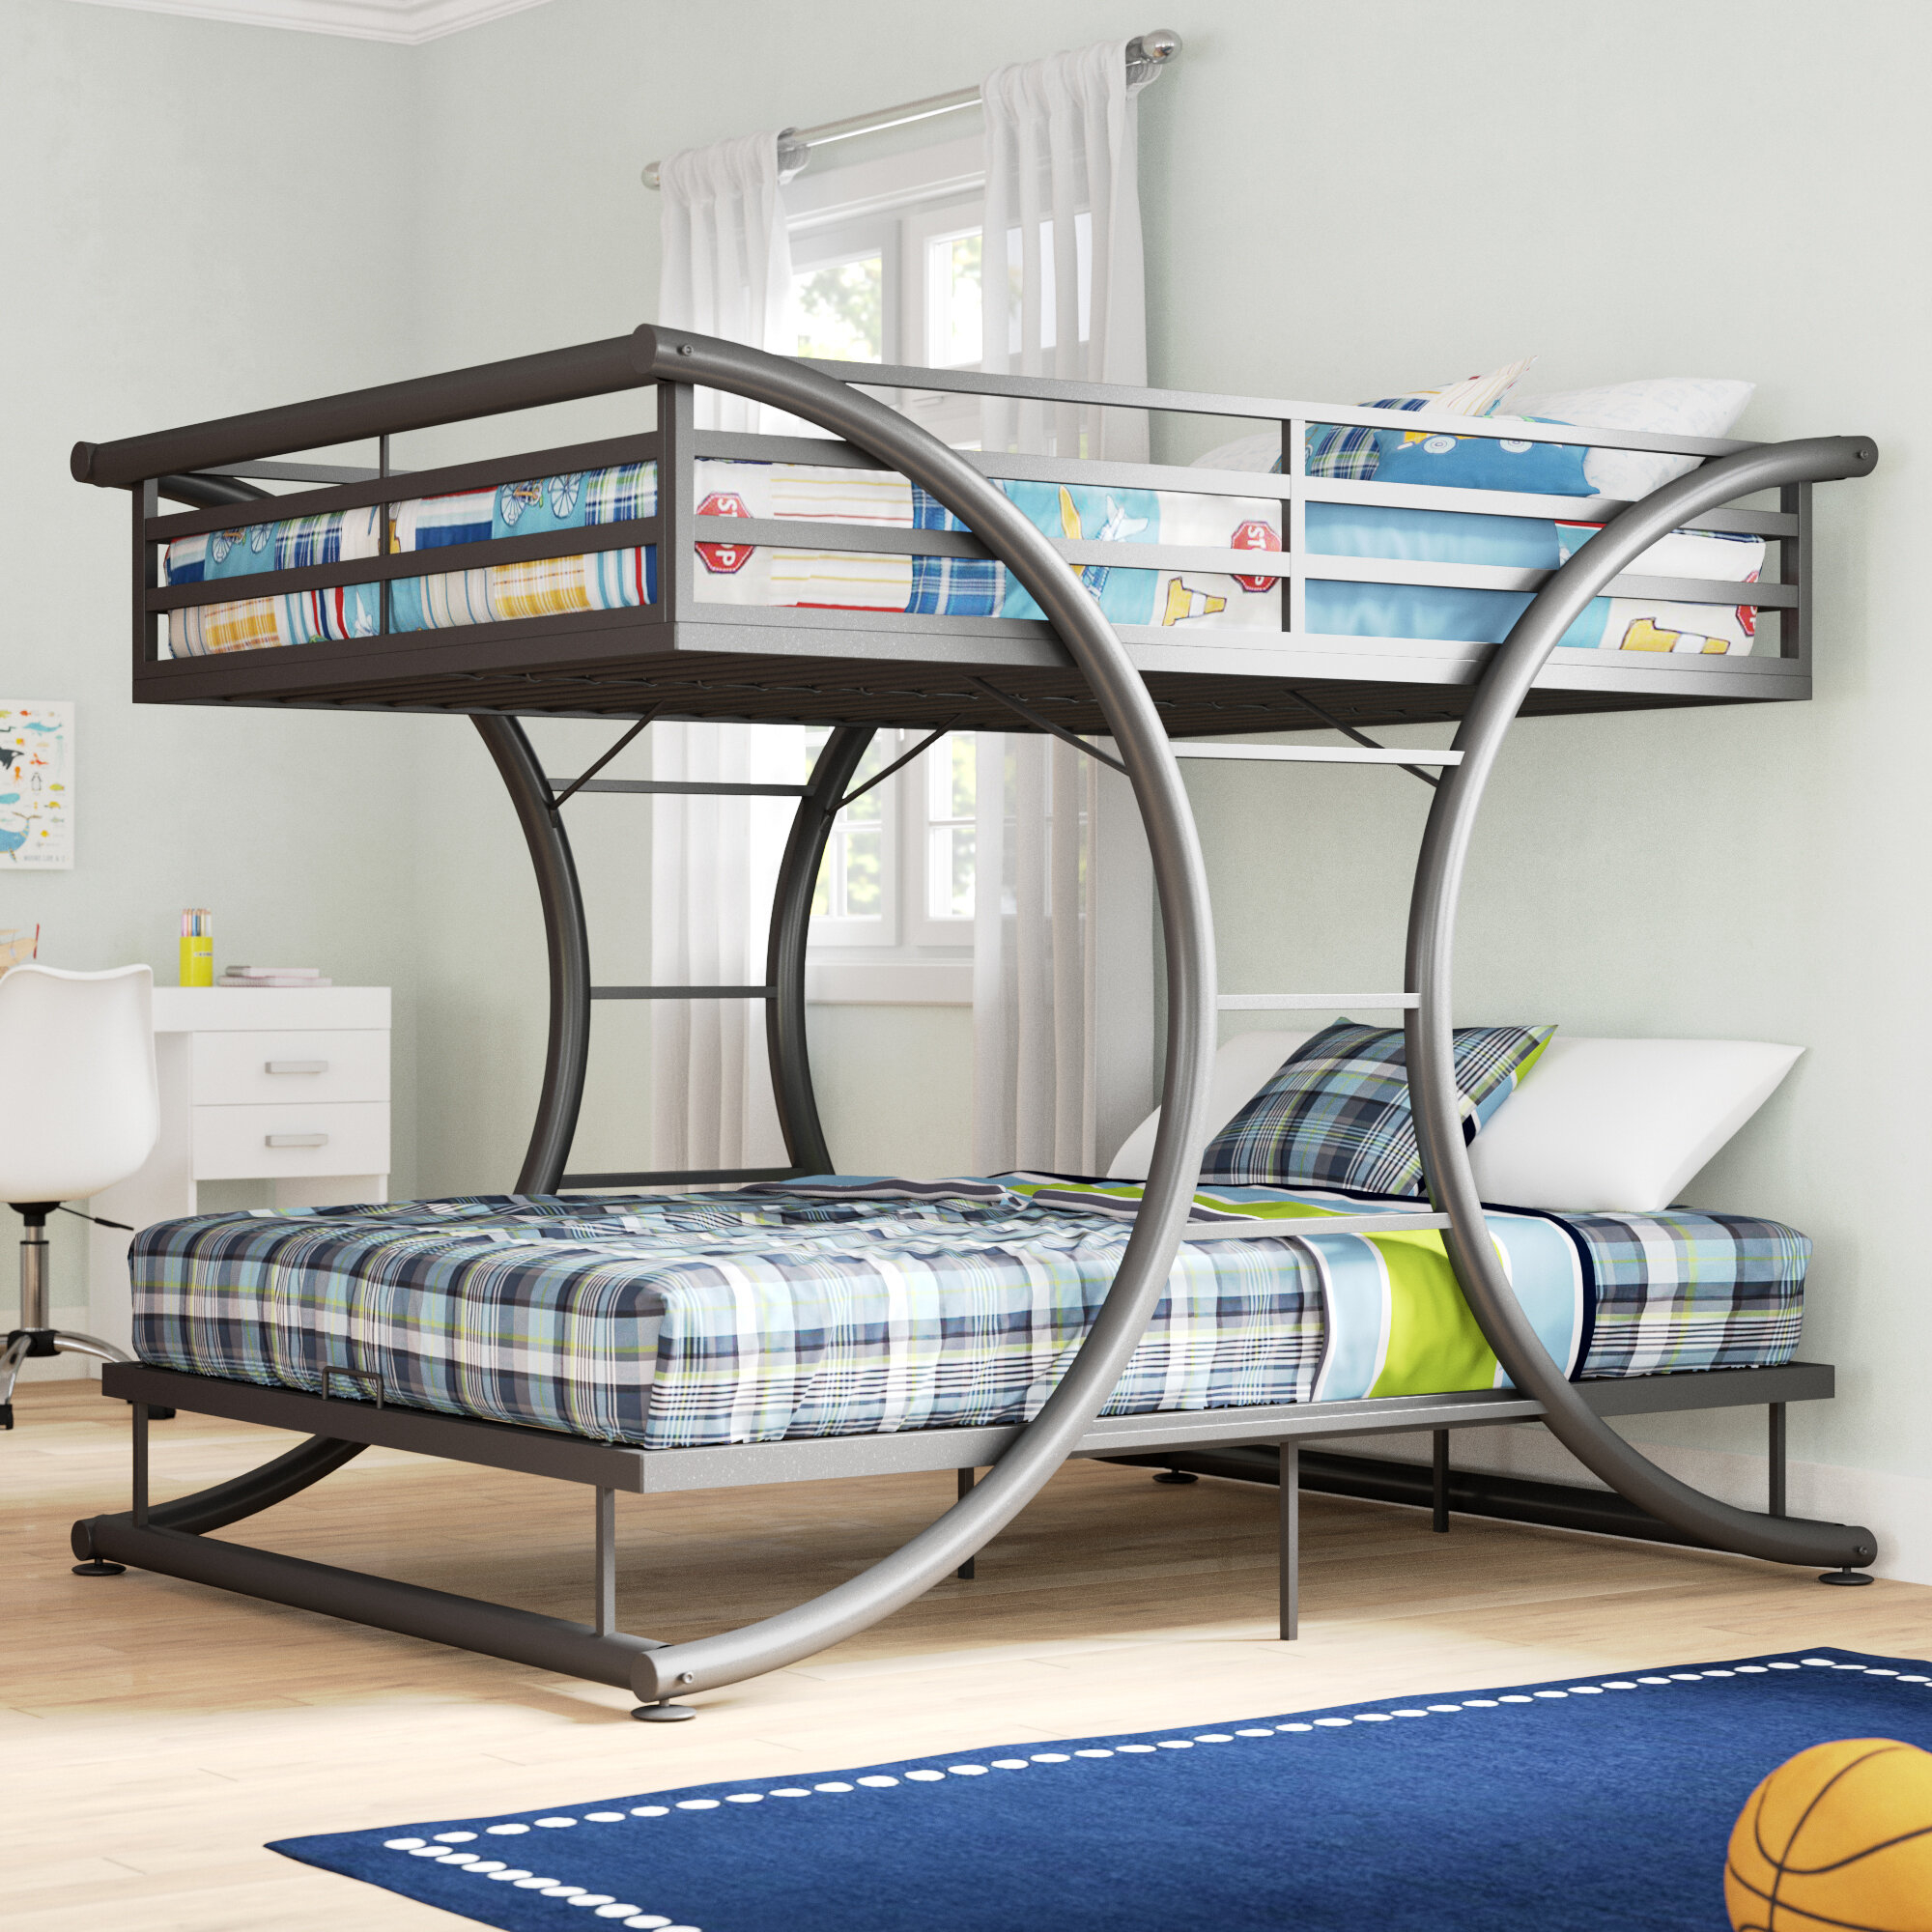 Heavy Duty Bunk Beds Visualhunt, Full Over Full Metal Bunk Beds